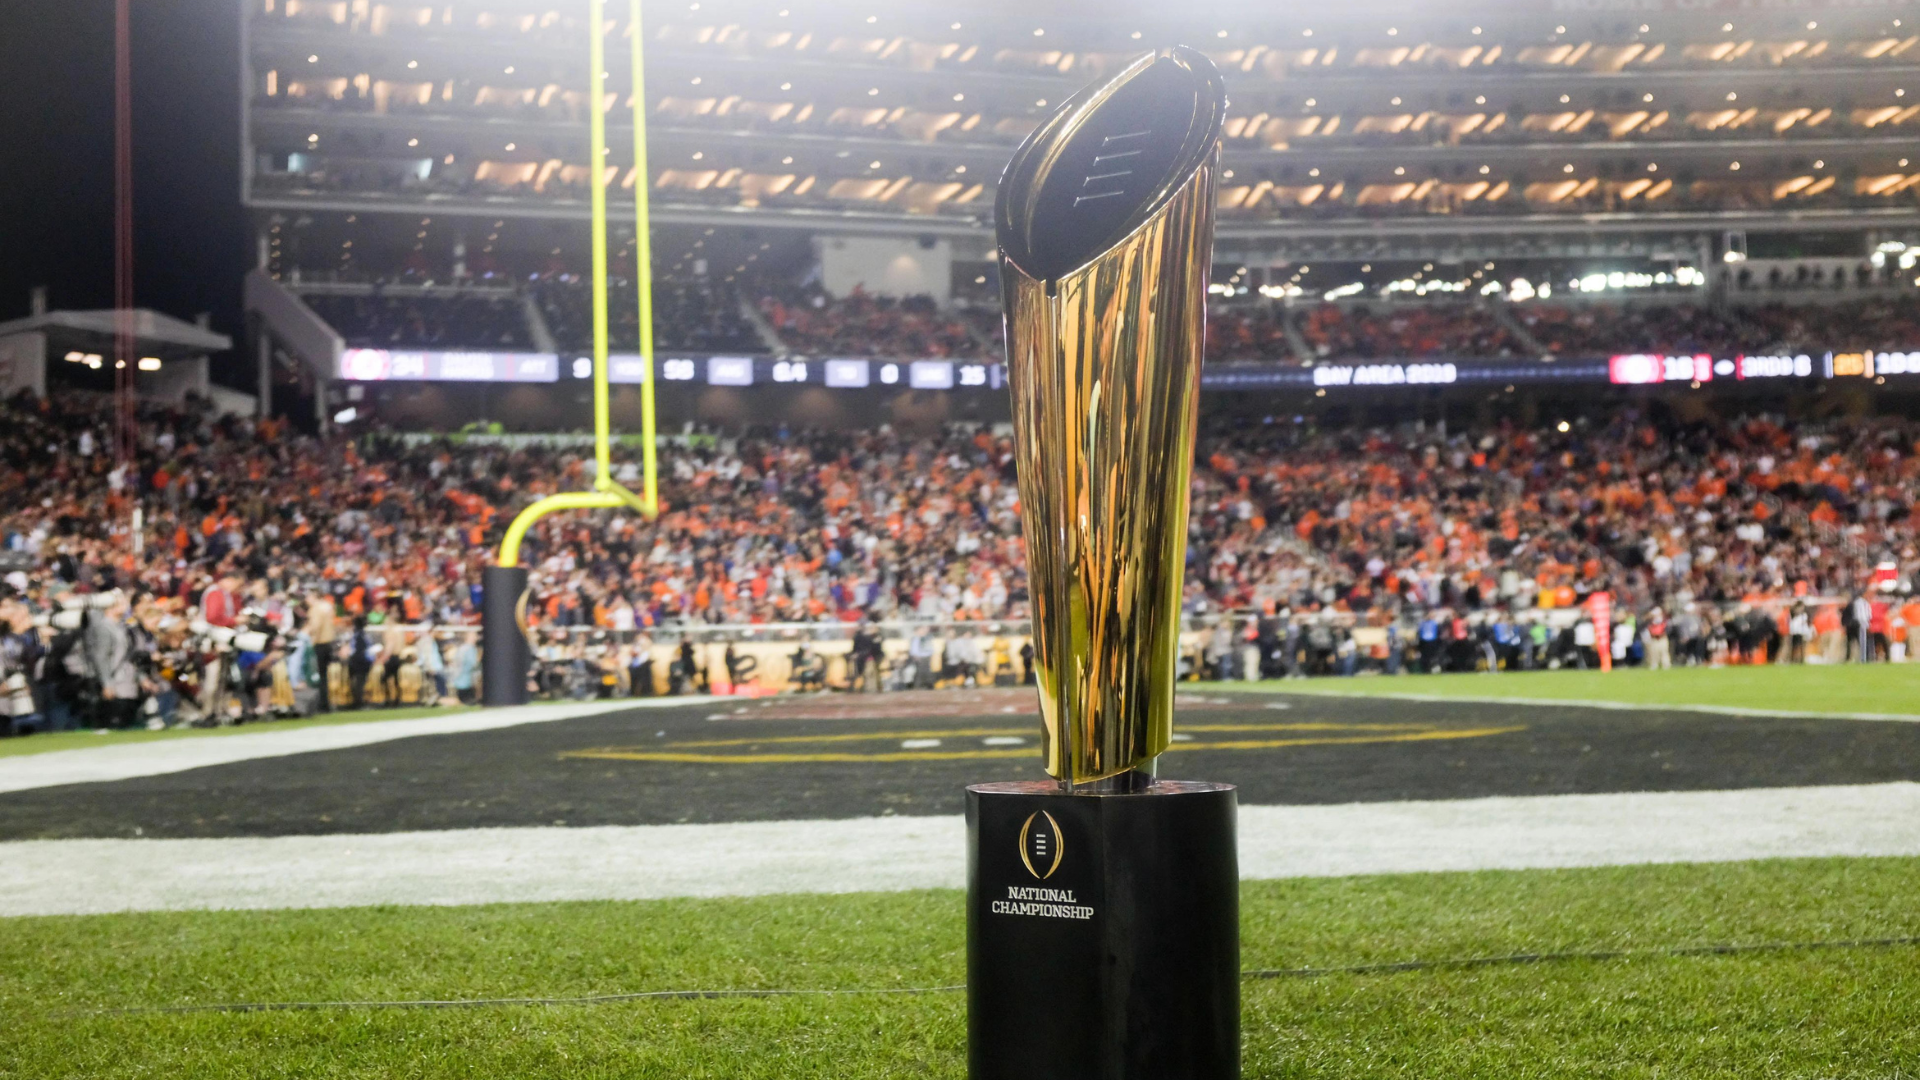 A national championship trophy placed on the field with big crowd around it